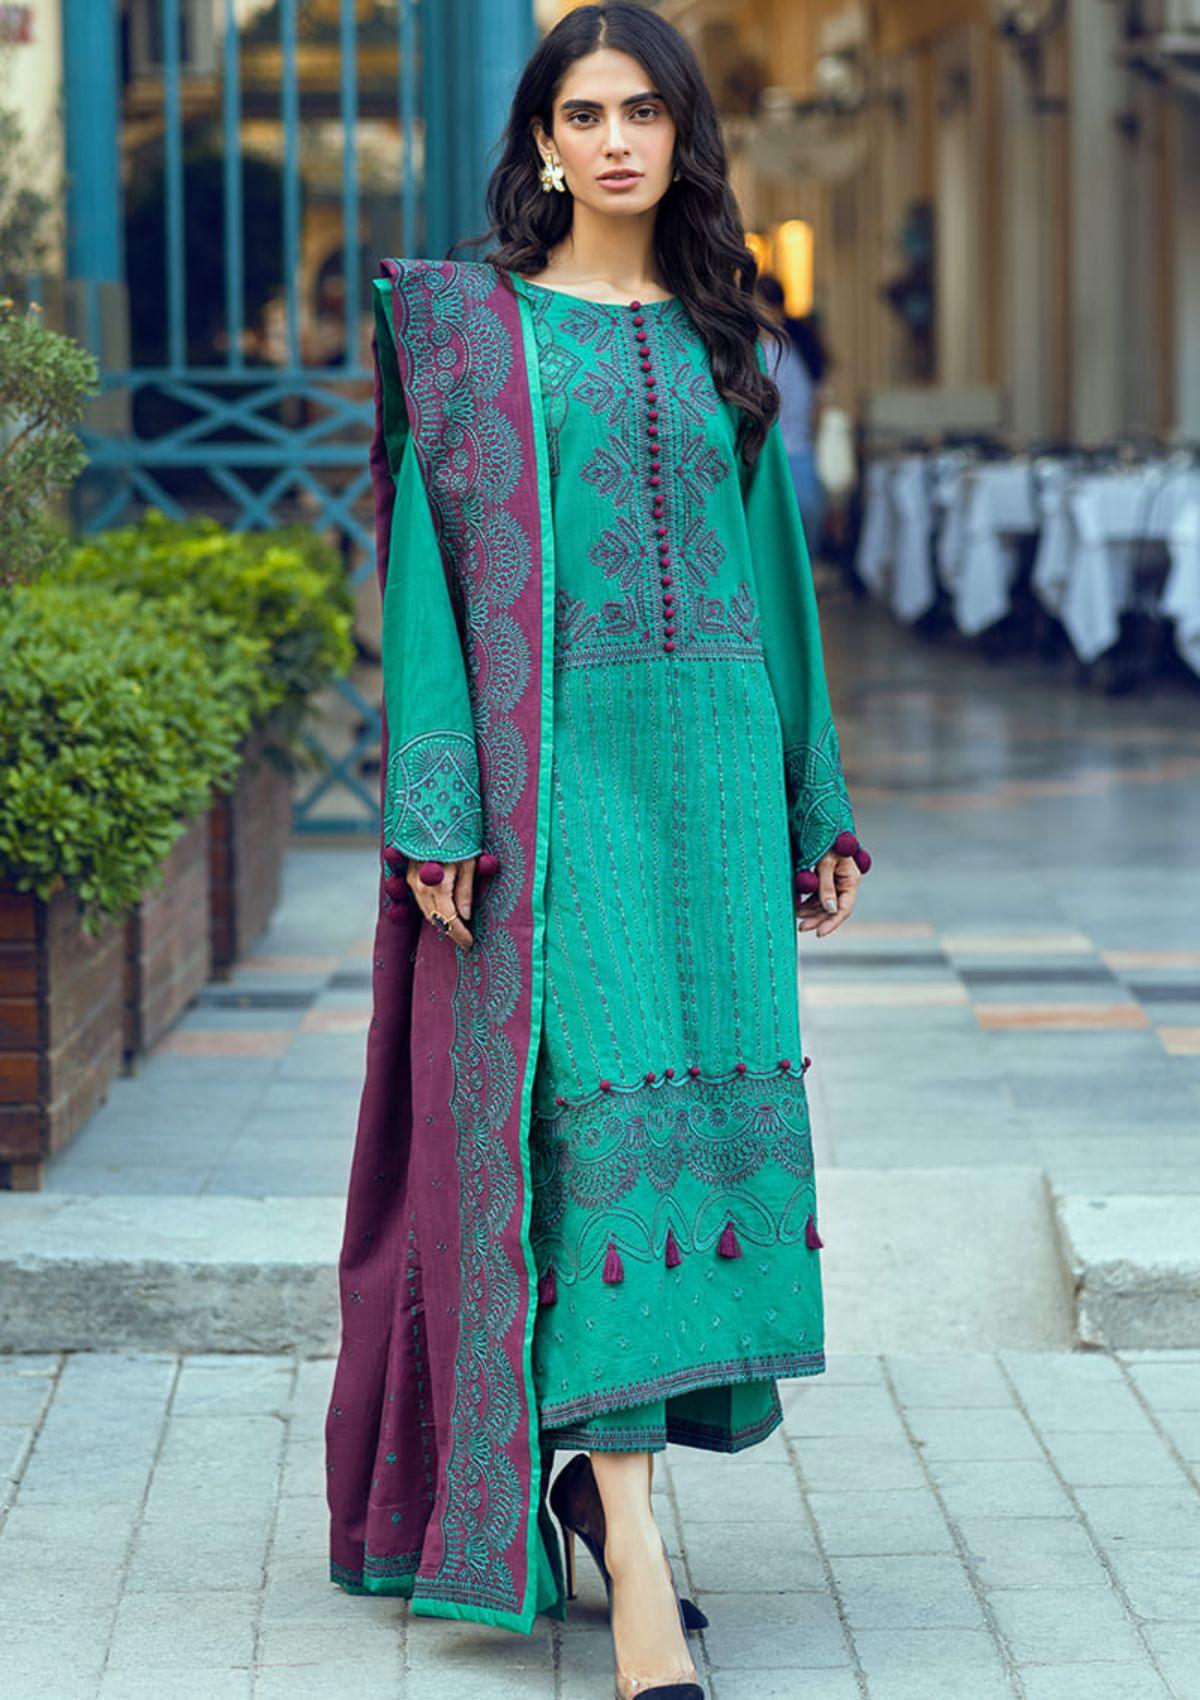 Mushq Broadway Returns Winter'22 MW-04 is available at Mohsin Saeed Fabrics. ✓ shop all the top women clothing brands in pakistan ✓ Best Price and Offers ✓ Free Shipping ✓ Cash on Delivery ✓ formal & Wedding Collections 